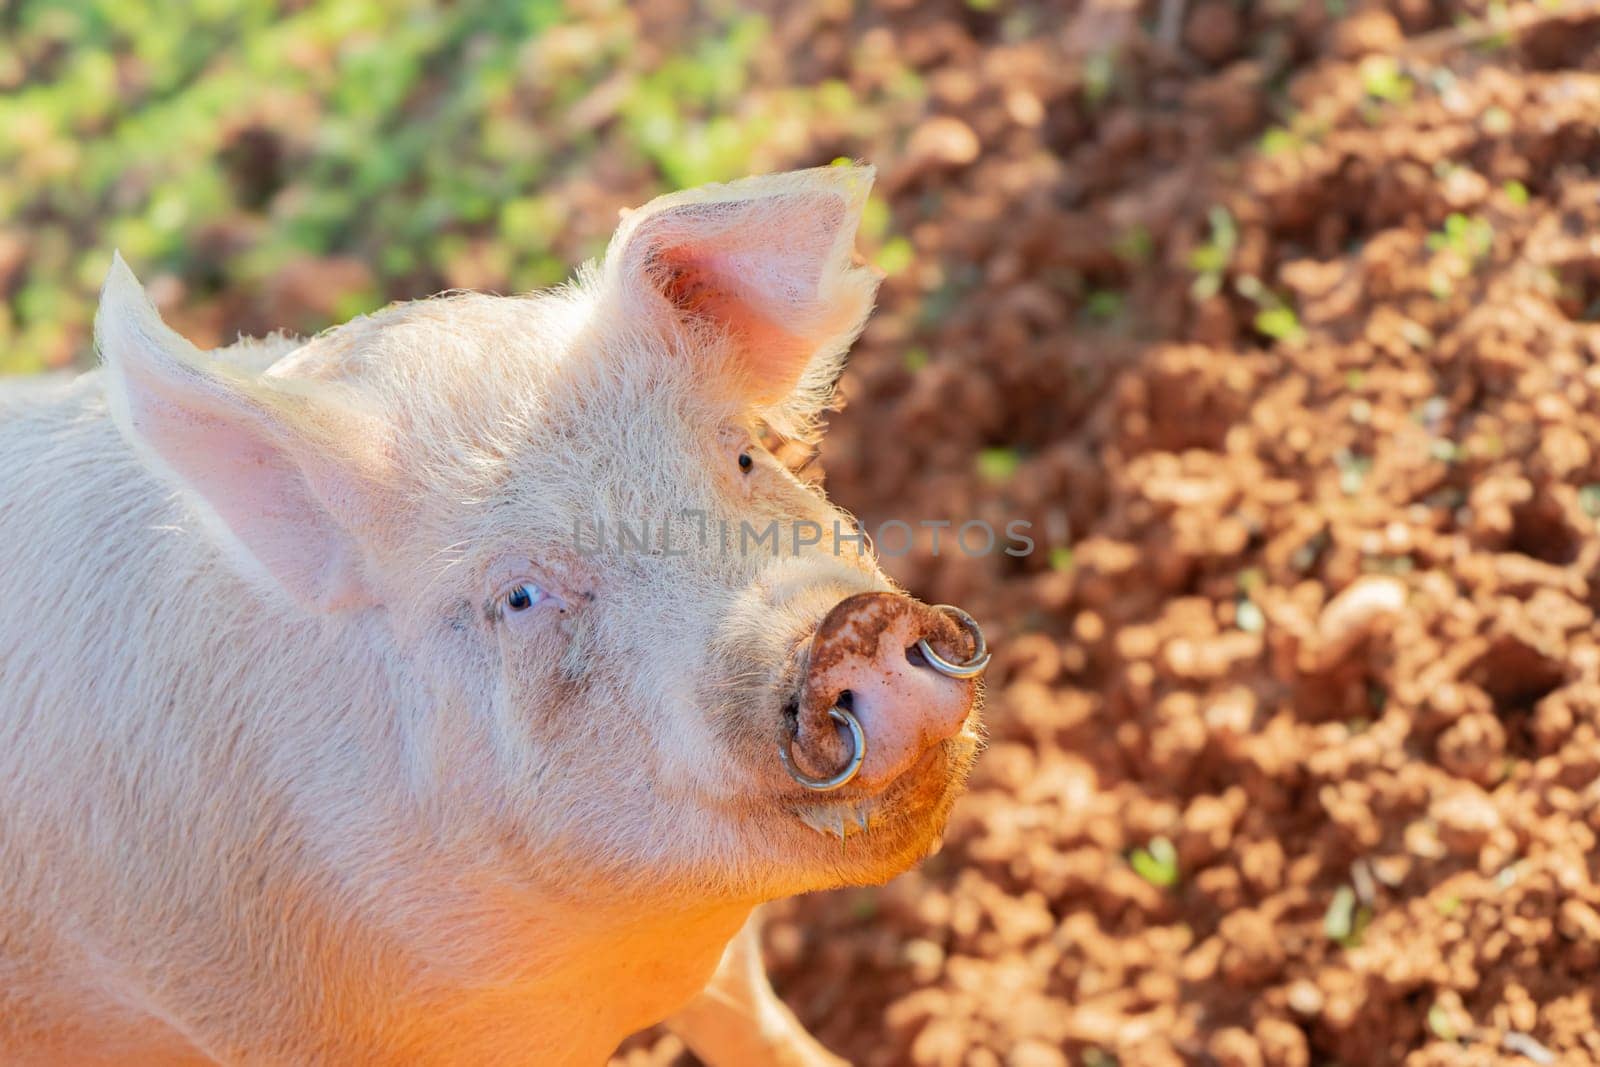 A close-up view captures the gentle gaze of a pink pig enjoying the warm sunlight, with a backdrop of rich, textured earth adding depth to the pastoral scene